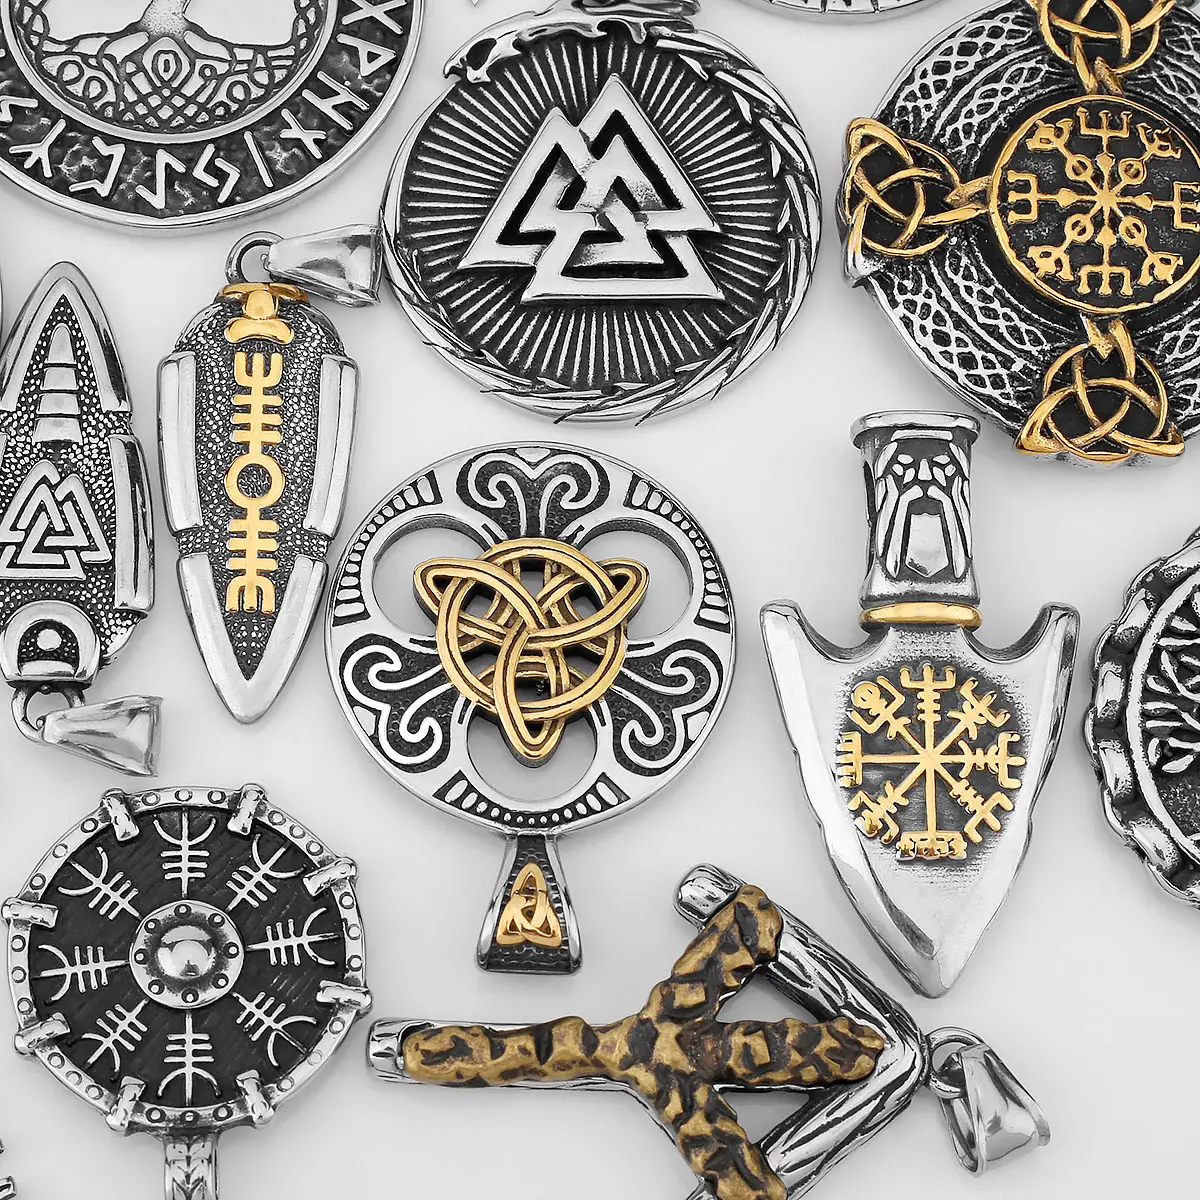 Stainless steel men's Nordic rune totem amulet rotatable tree of life necklace amulet wholesale Viking pendant